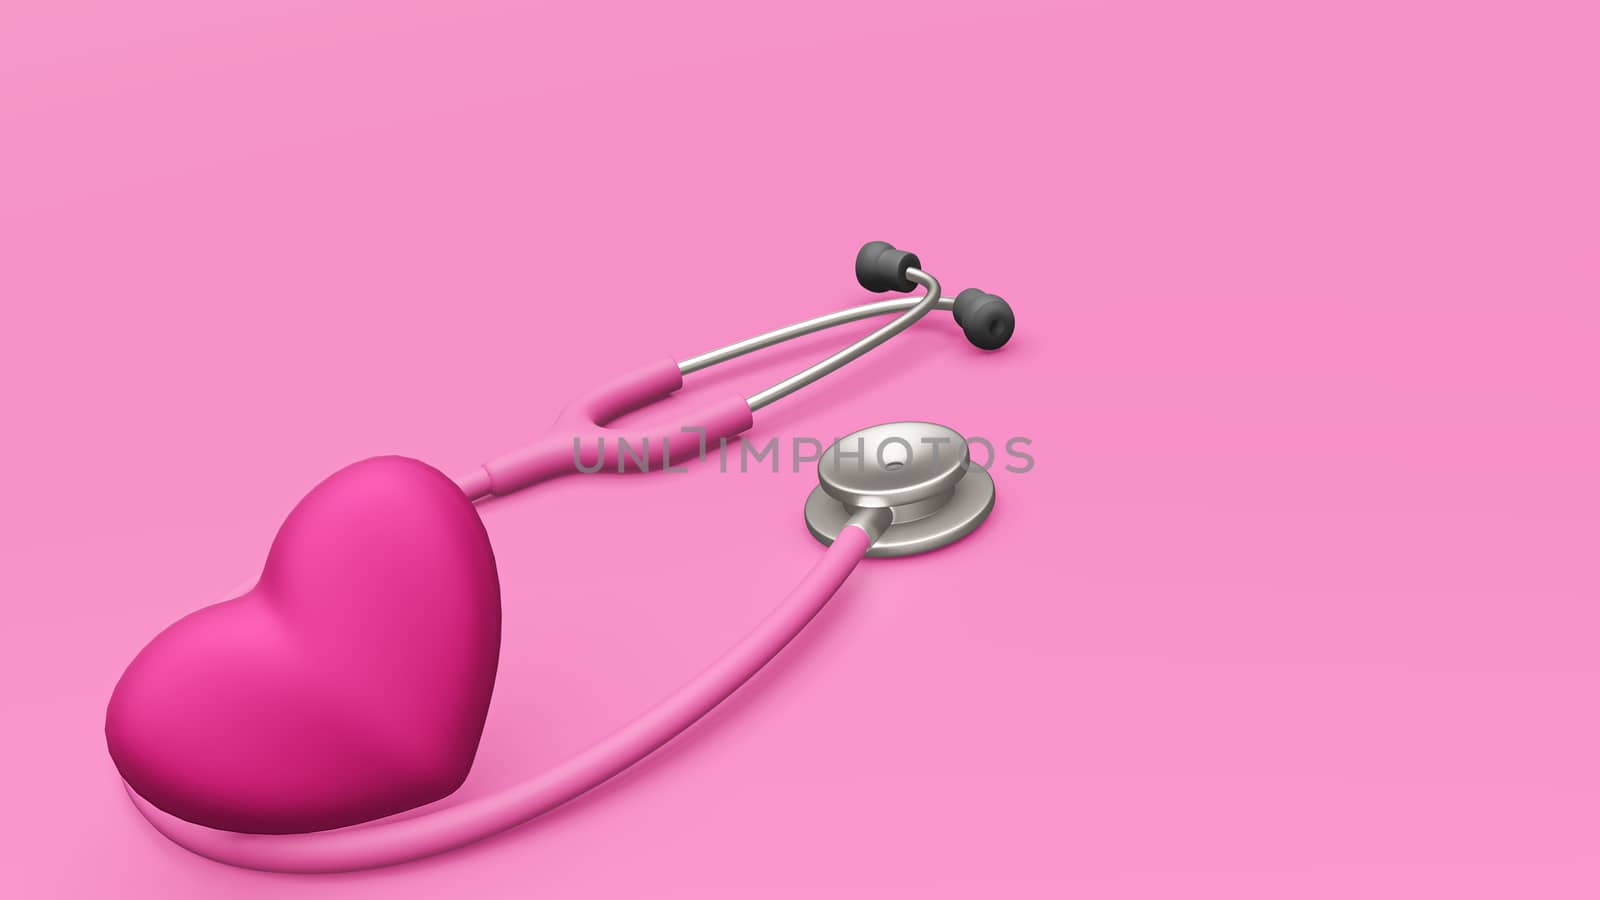 A 3D rendered image of a pink stethoscope and a heart on pink background.